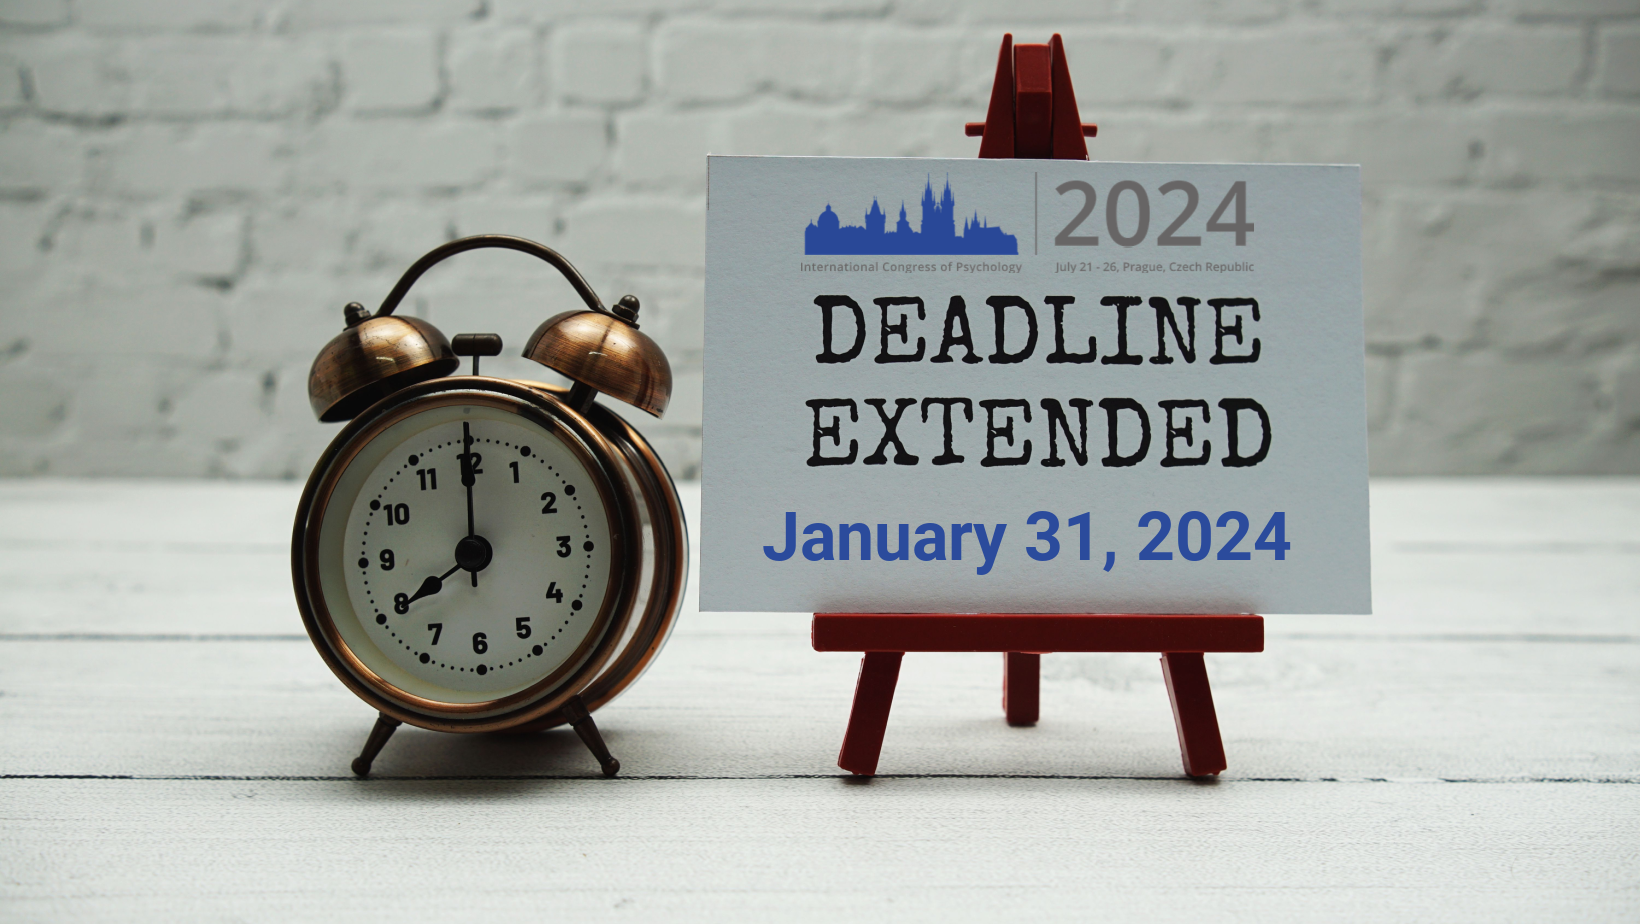 ICP2024 Submission Deadline Extended to January 31, 2024